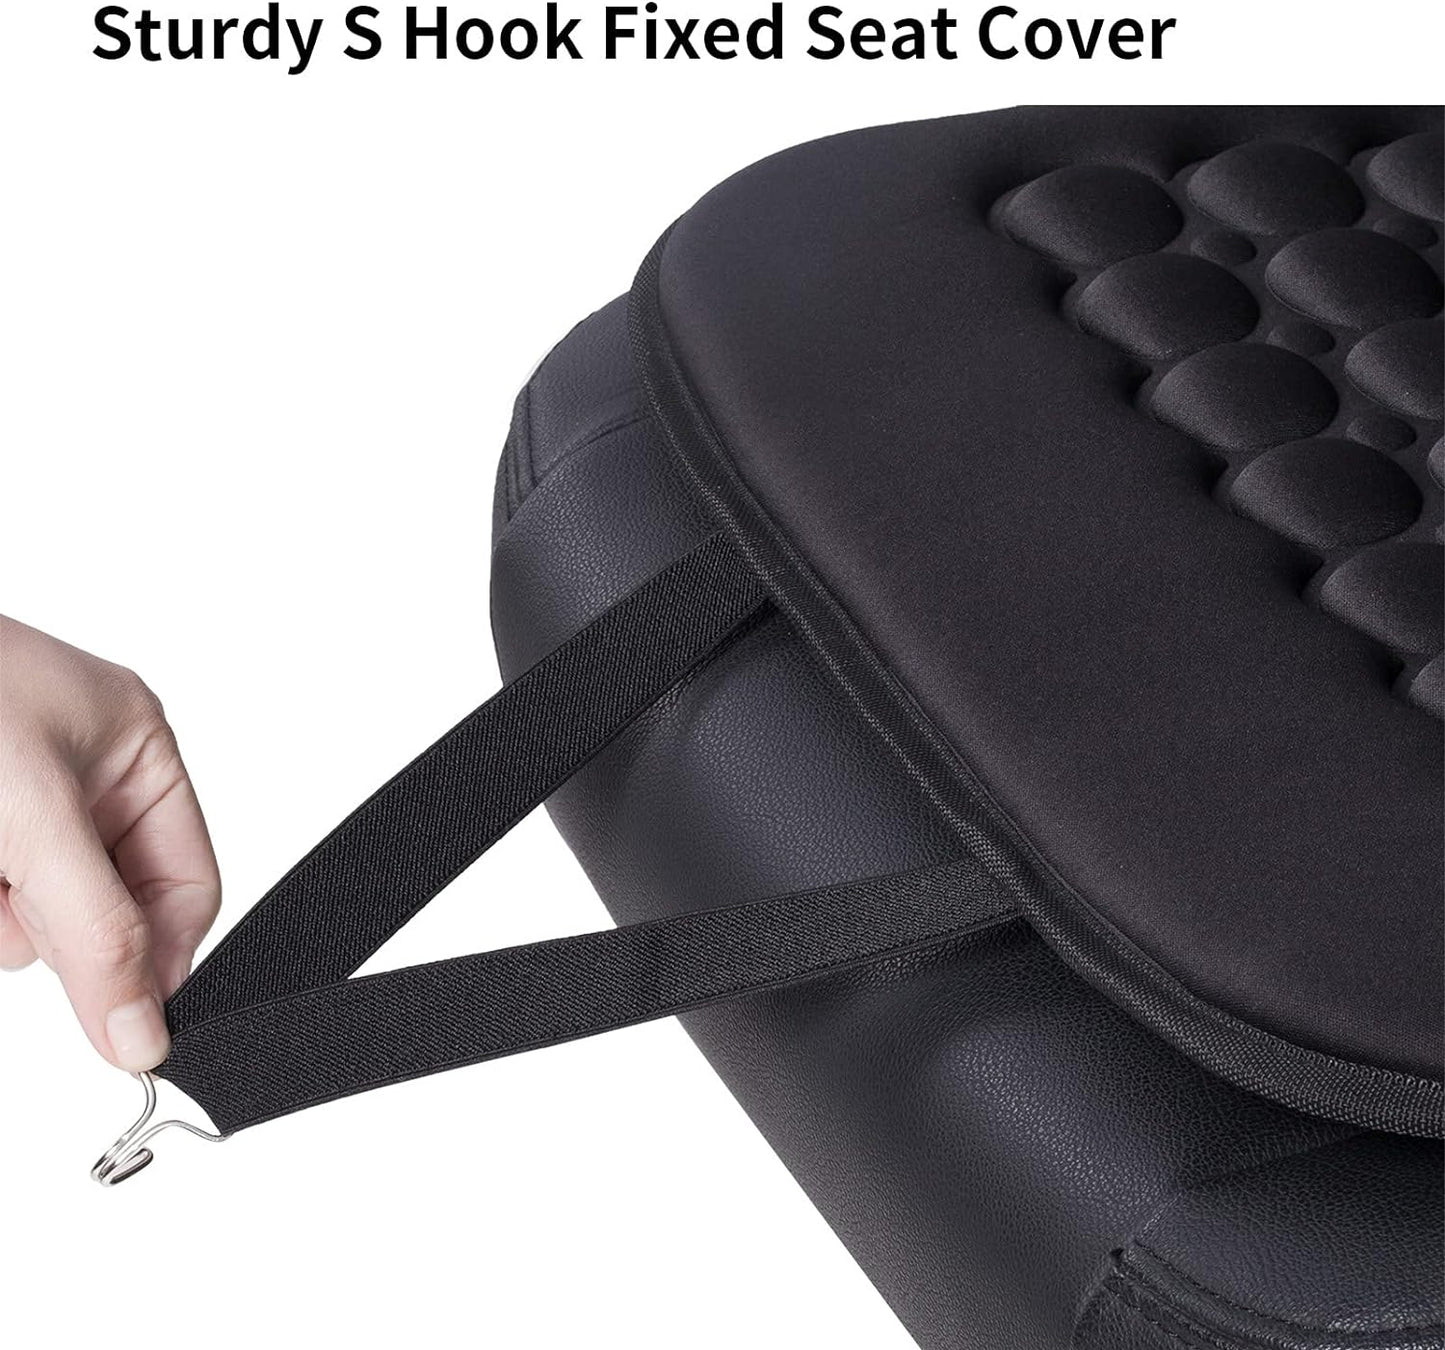 Auto Car Seat Cover Breathable Protector Cushion